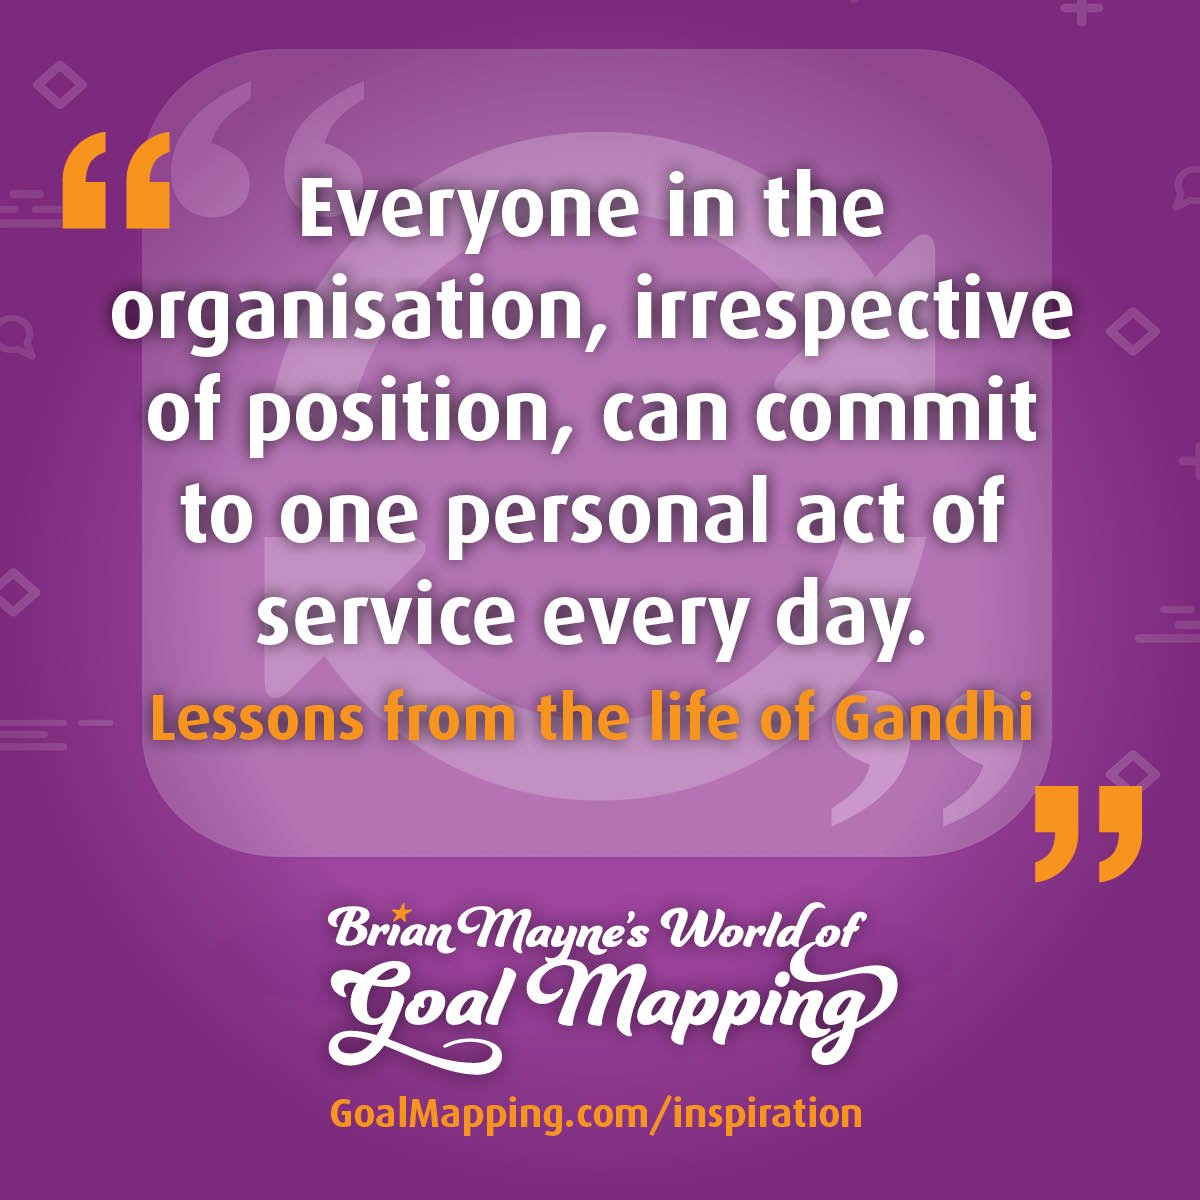 "Everyone in the organisation, irrespective of position, can commit to one personal act of service every day." Lessons from the life of Gandhi